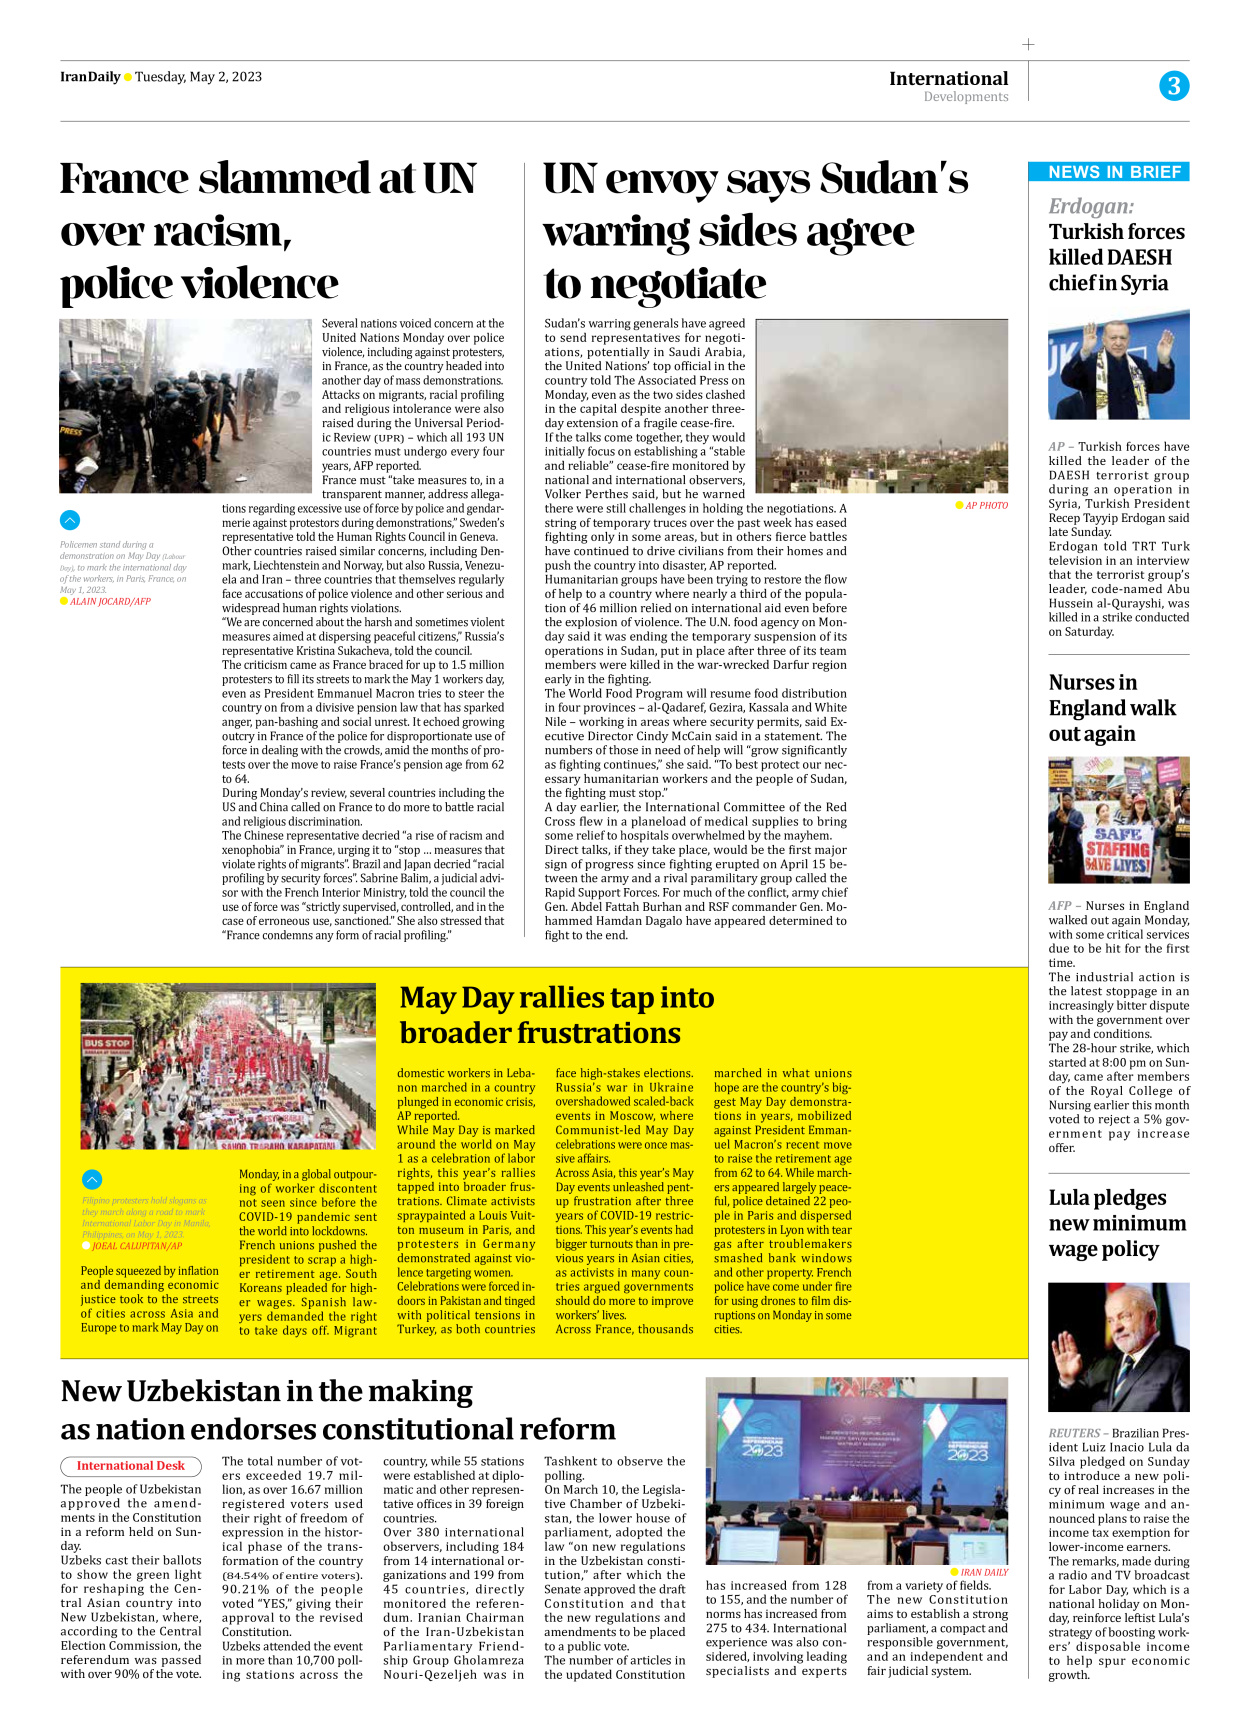 Iran Daily - Number Seven Thousand Two Hundred and Eighty One - 02 May 2023 - Page 3